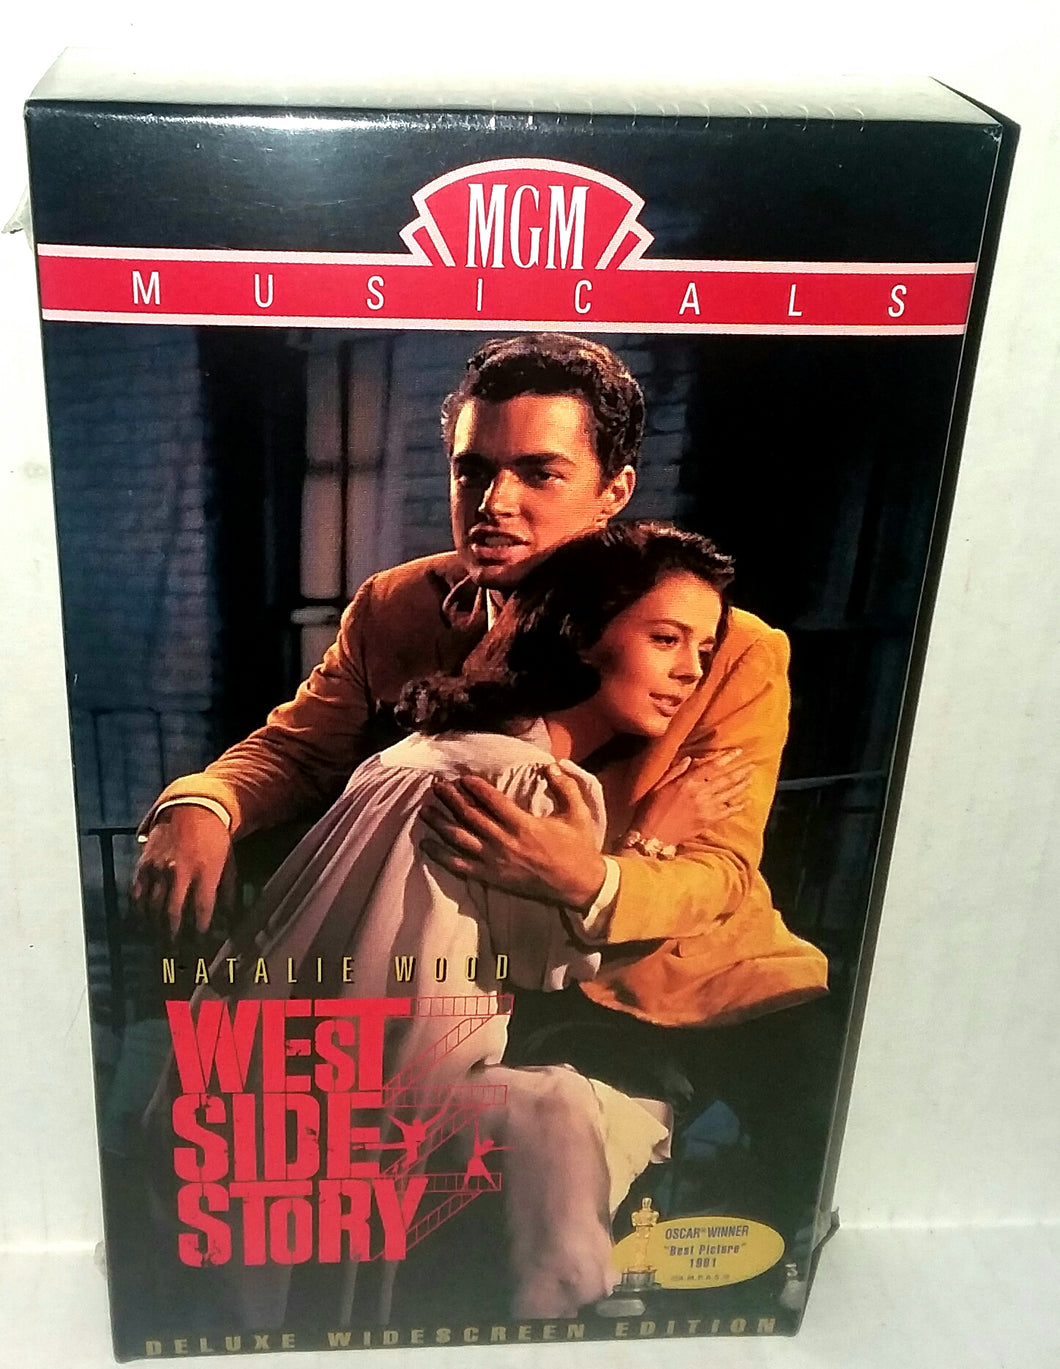 West Side Story VHS Movie Tape NWOT New Vintage 1998 Deluxe Widescreen Edition MGM M305295